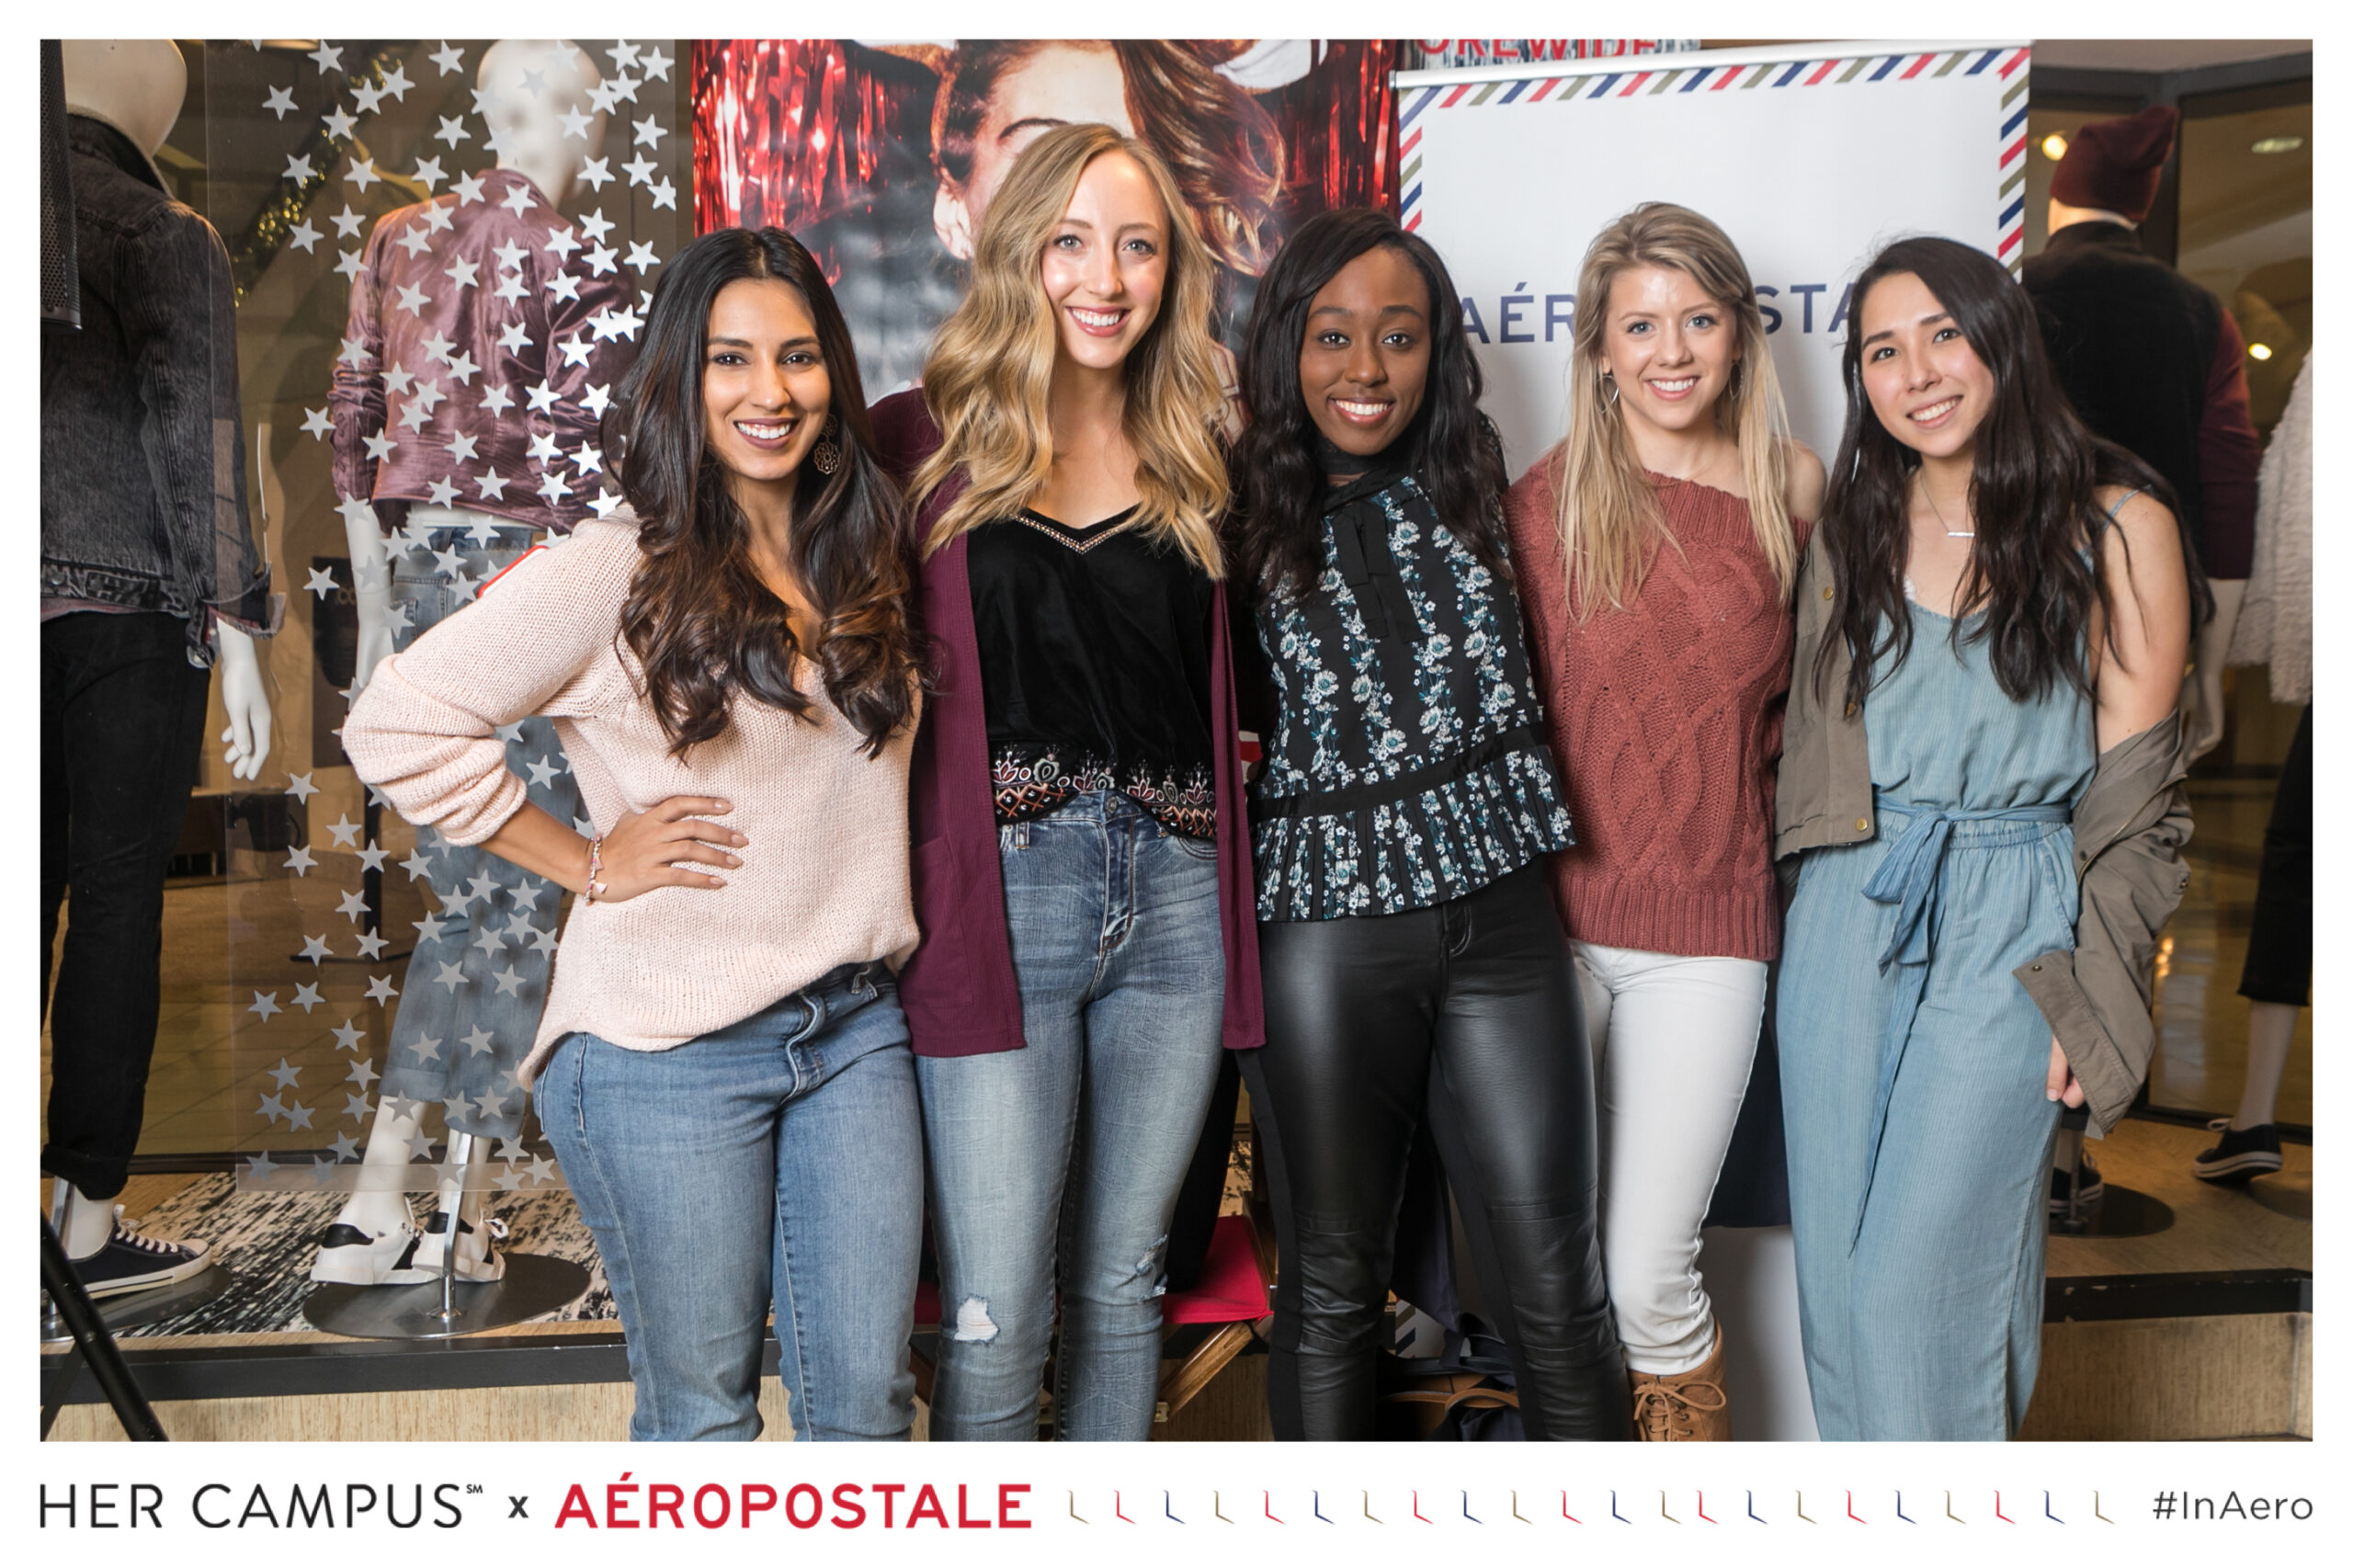 Jordan Taylor C - Prepping for Winter at the Her Campus x Aeropostale Event